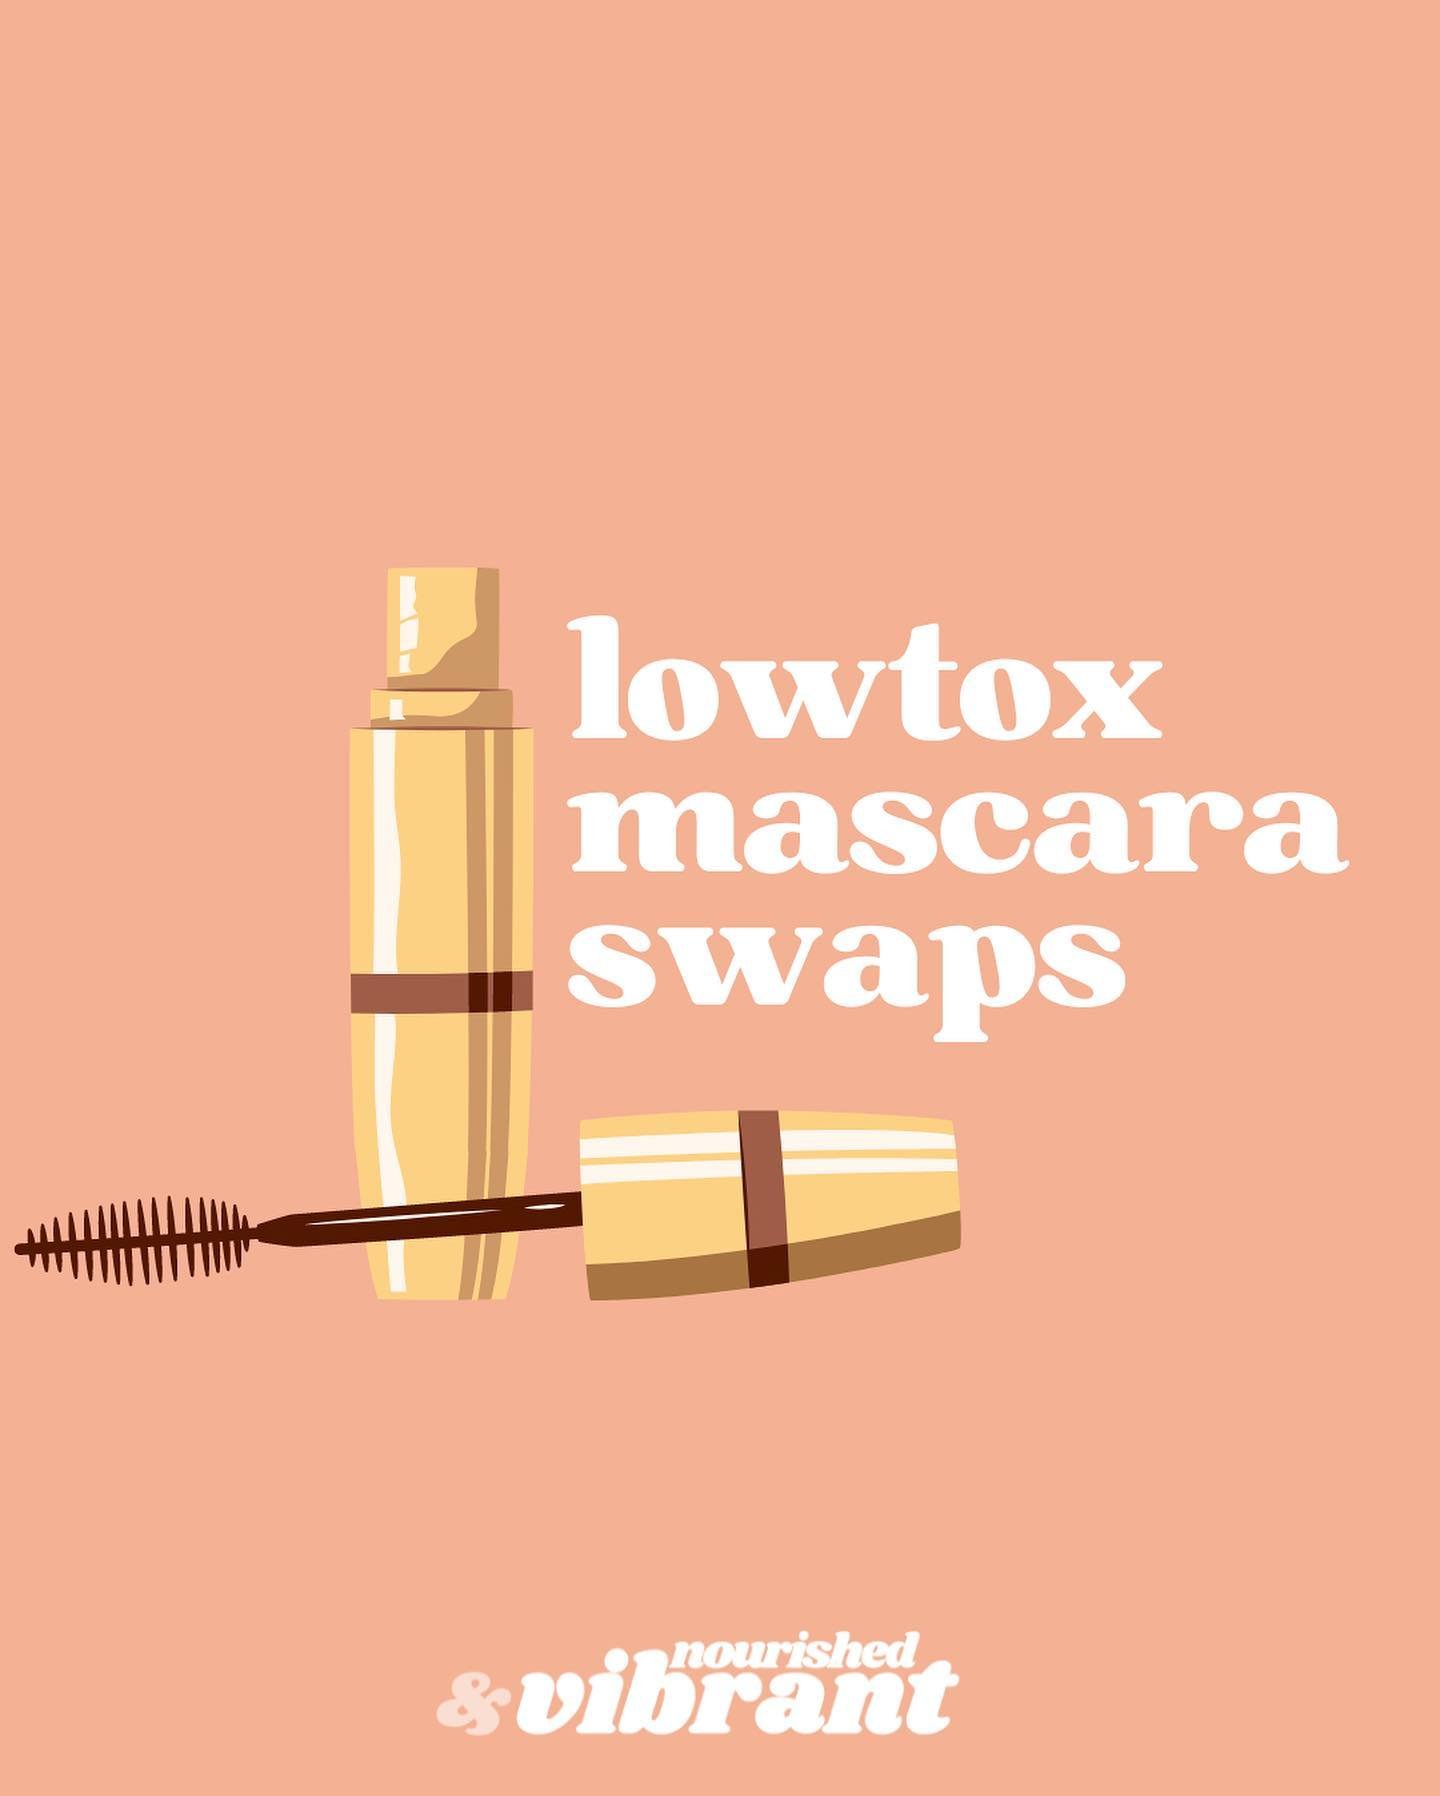 Starting with some make up swap posts for you! 

Let me know if you&rsquo;d like me to continue with these! 

Mascara is something that just makes us feel good right? Slap on some mascara and you just look put together, even if you&rsquo;re still in 